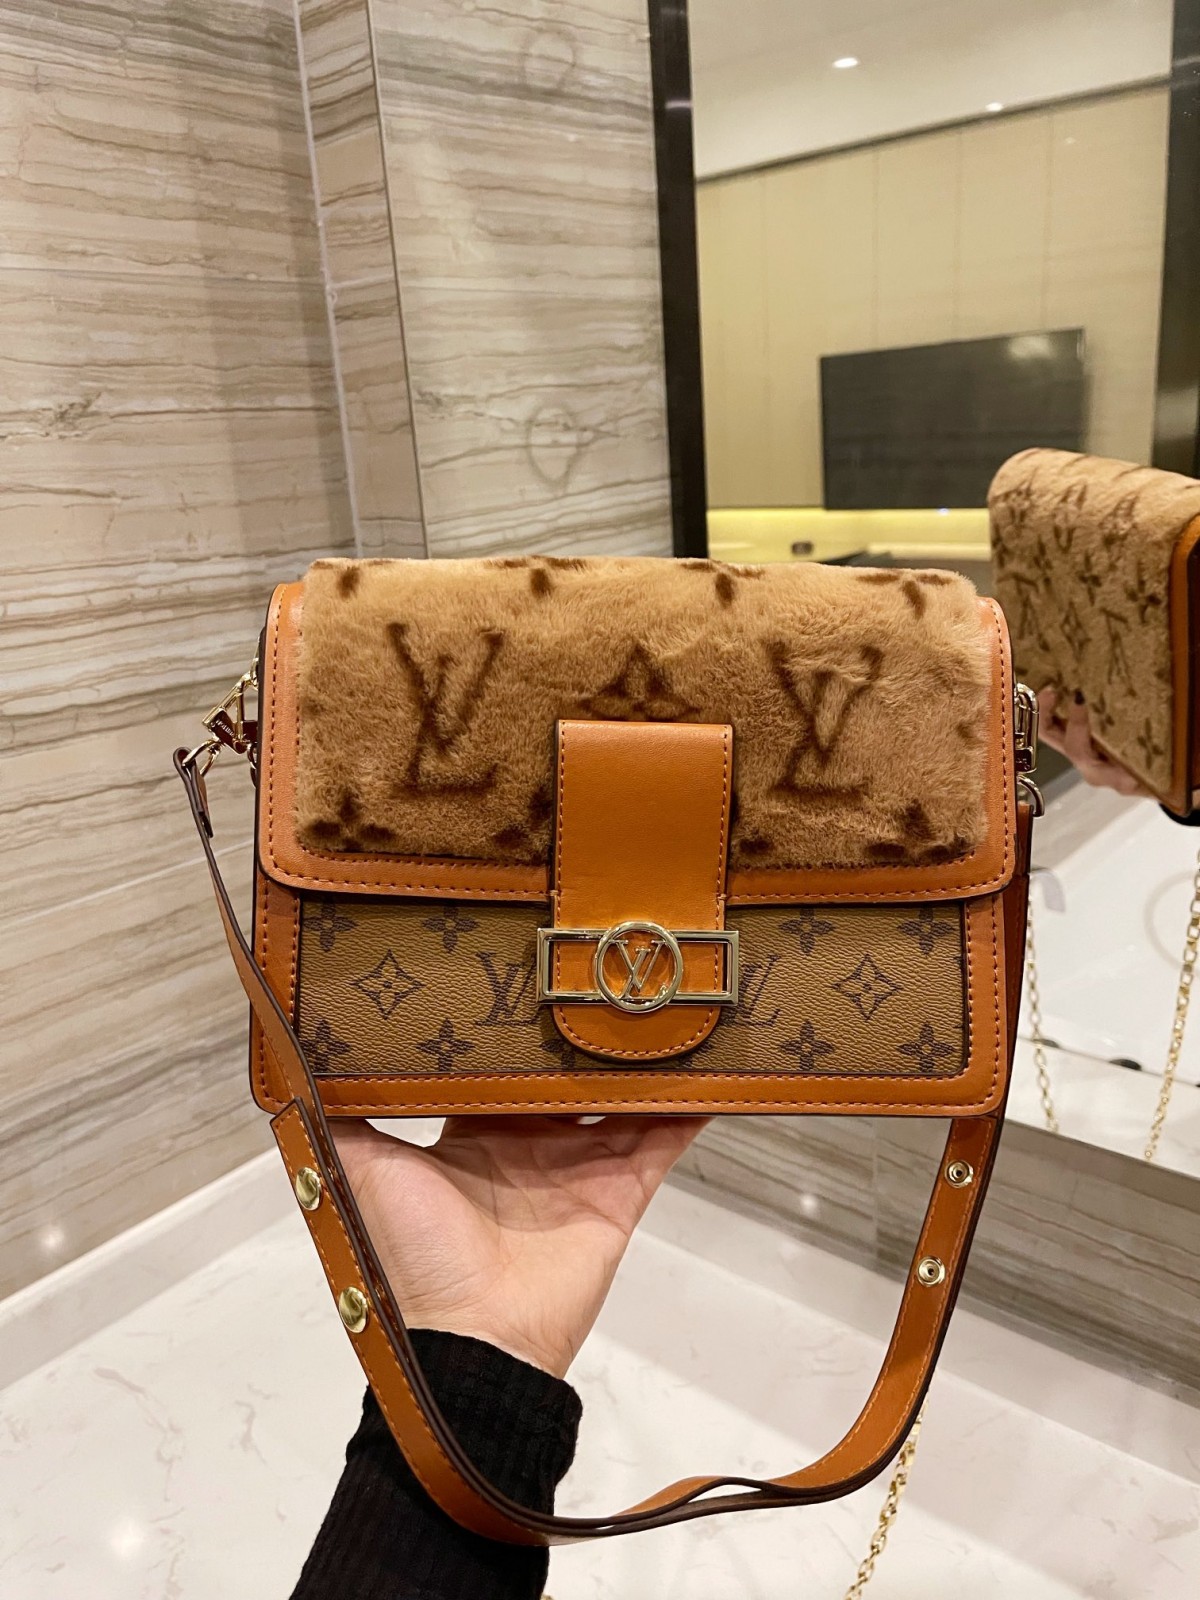 Where can I buy good quality and cheap Louis Vuitton Dauphine replica bags? (2022 special)-Best Quality Fake Louis Vuitton Bag Online Store, Replica designer bag ru